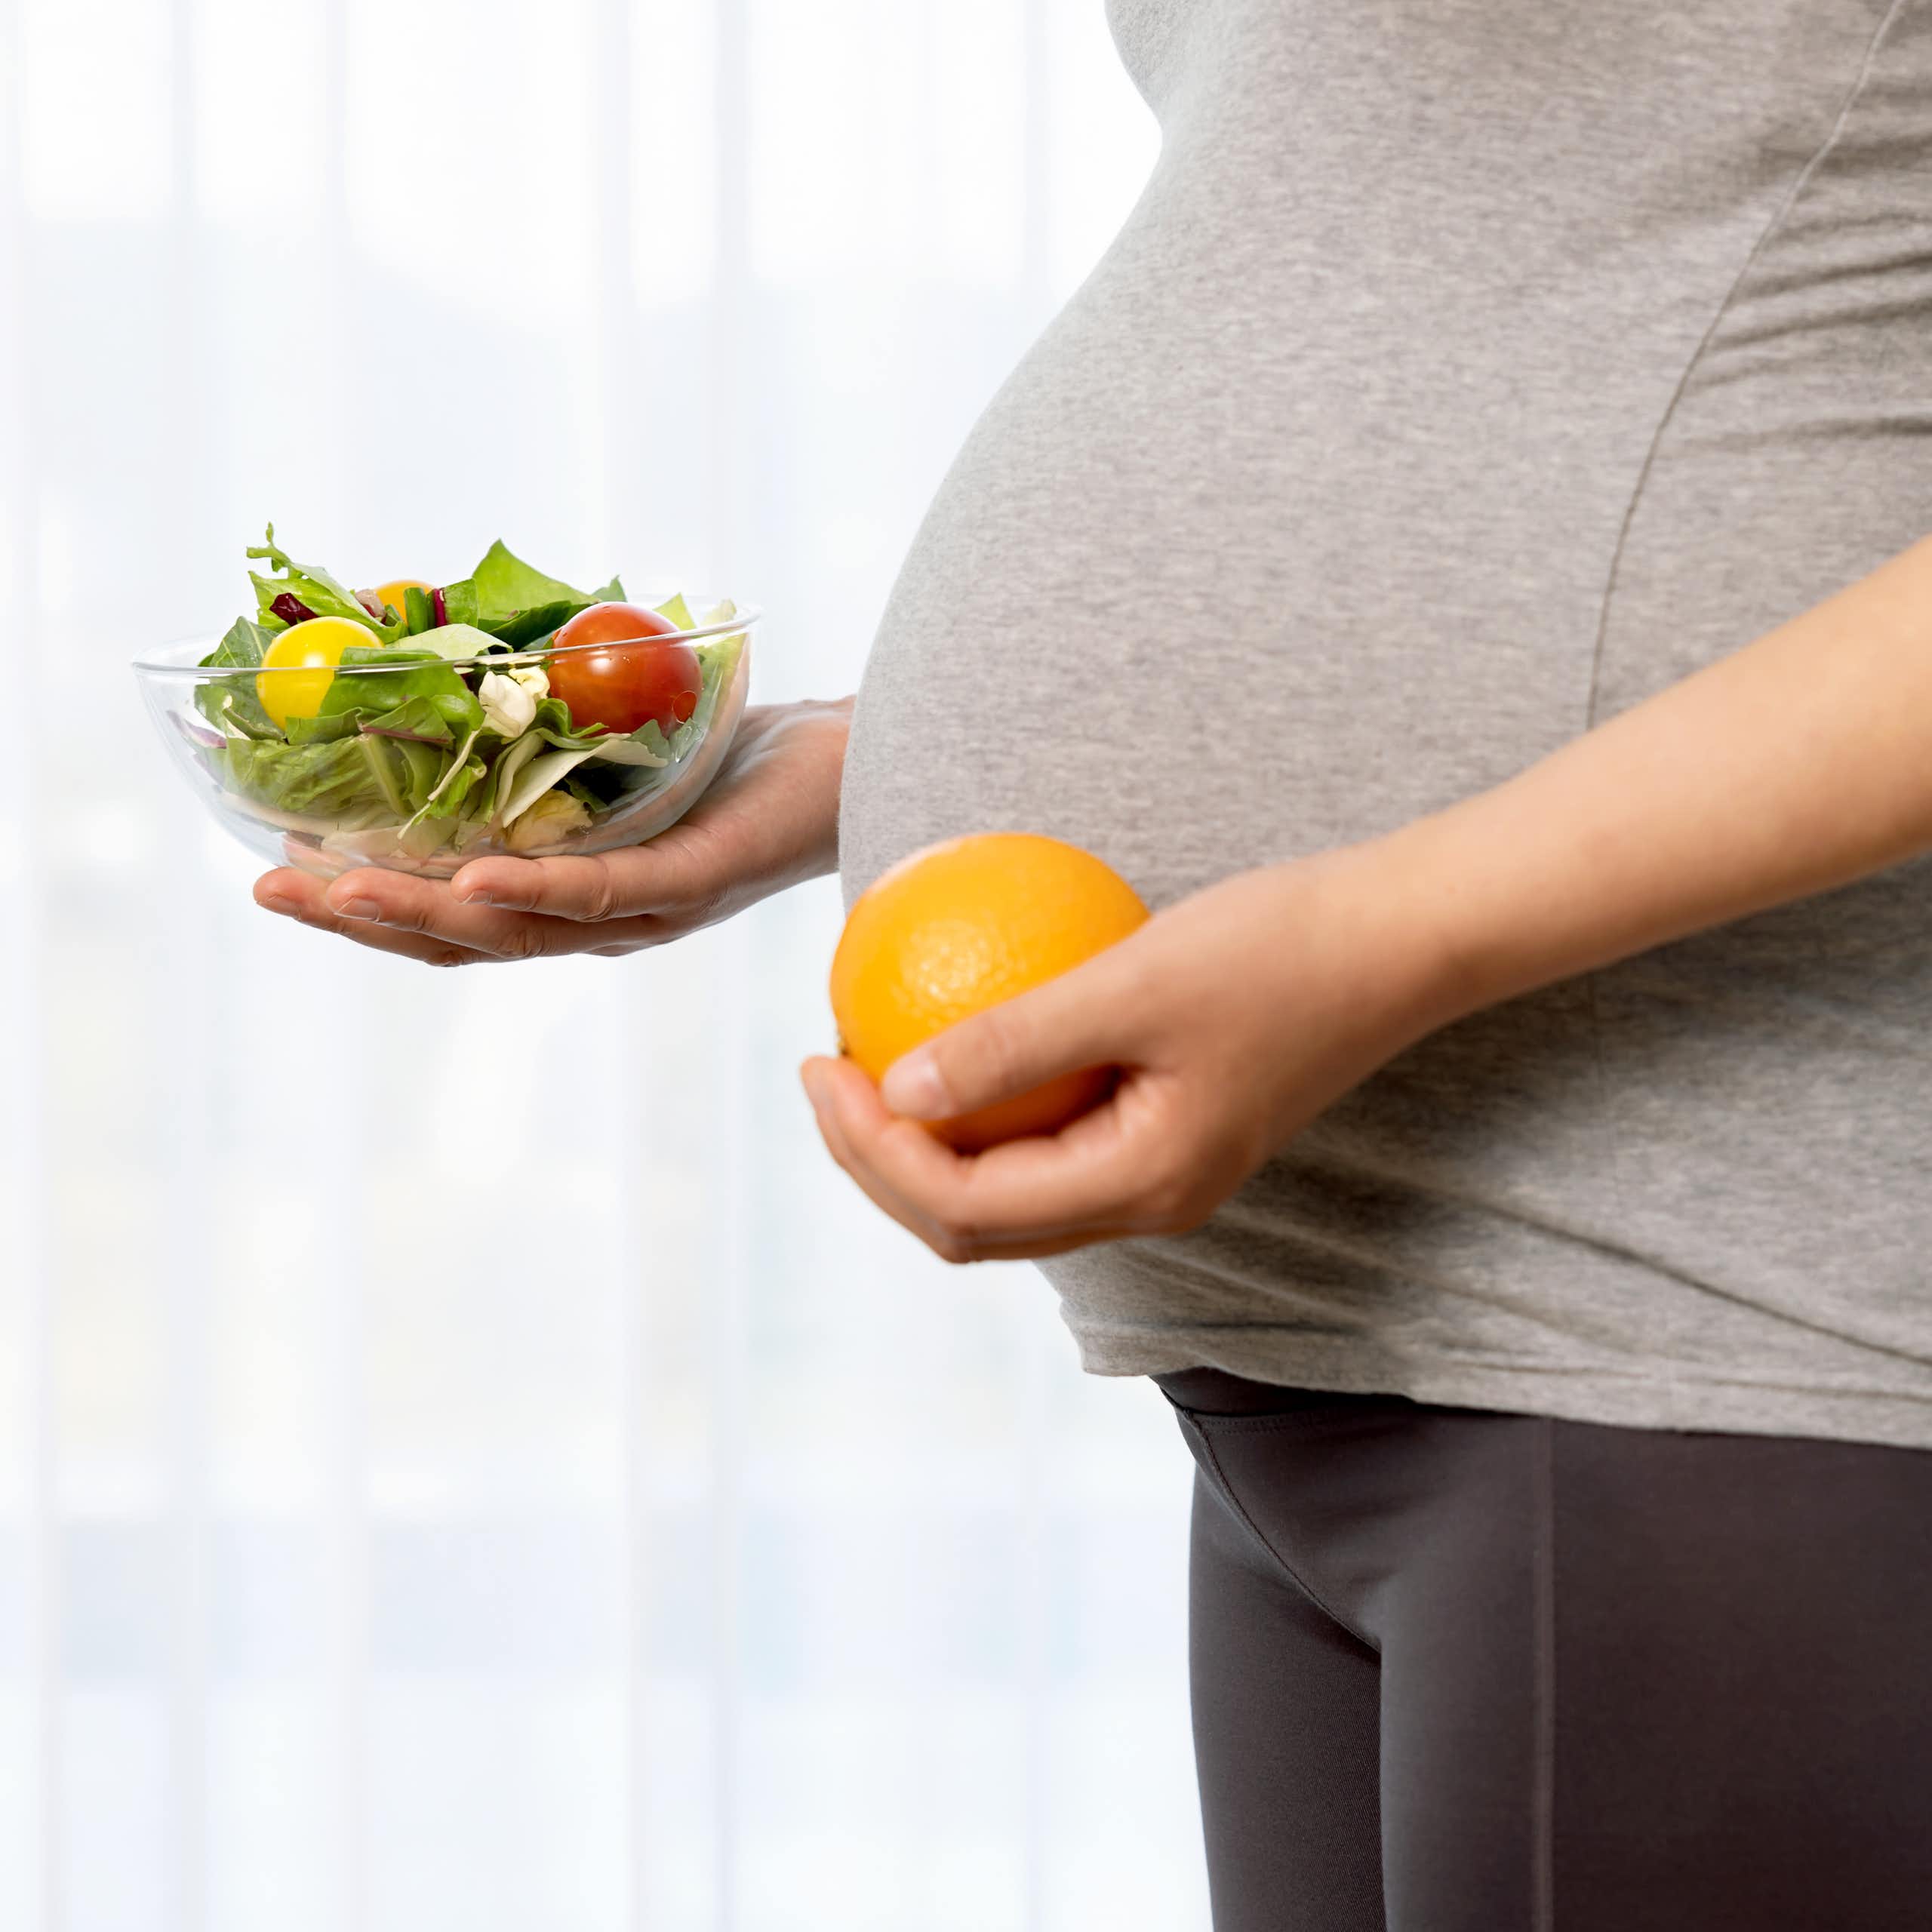 Pregnant woman holding a bowl of fruit